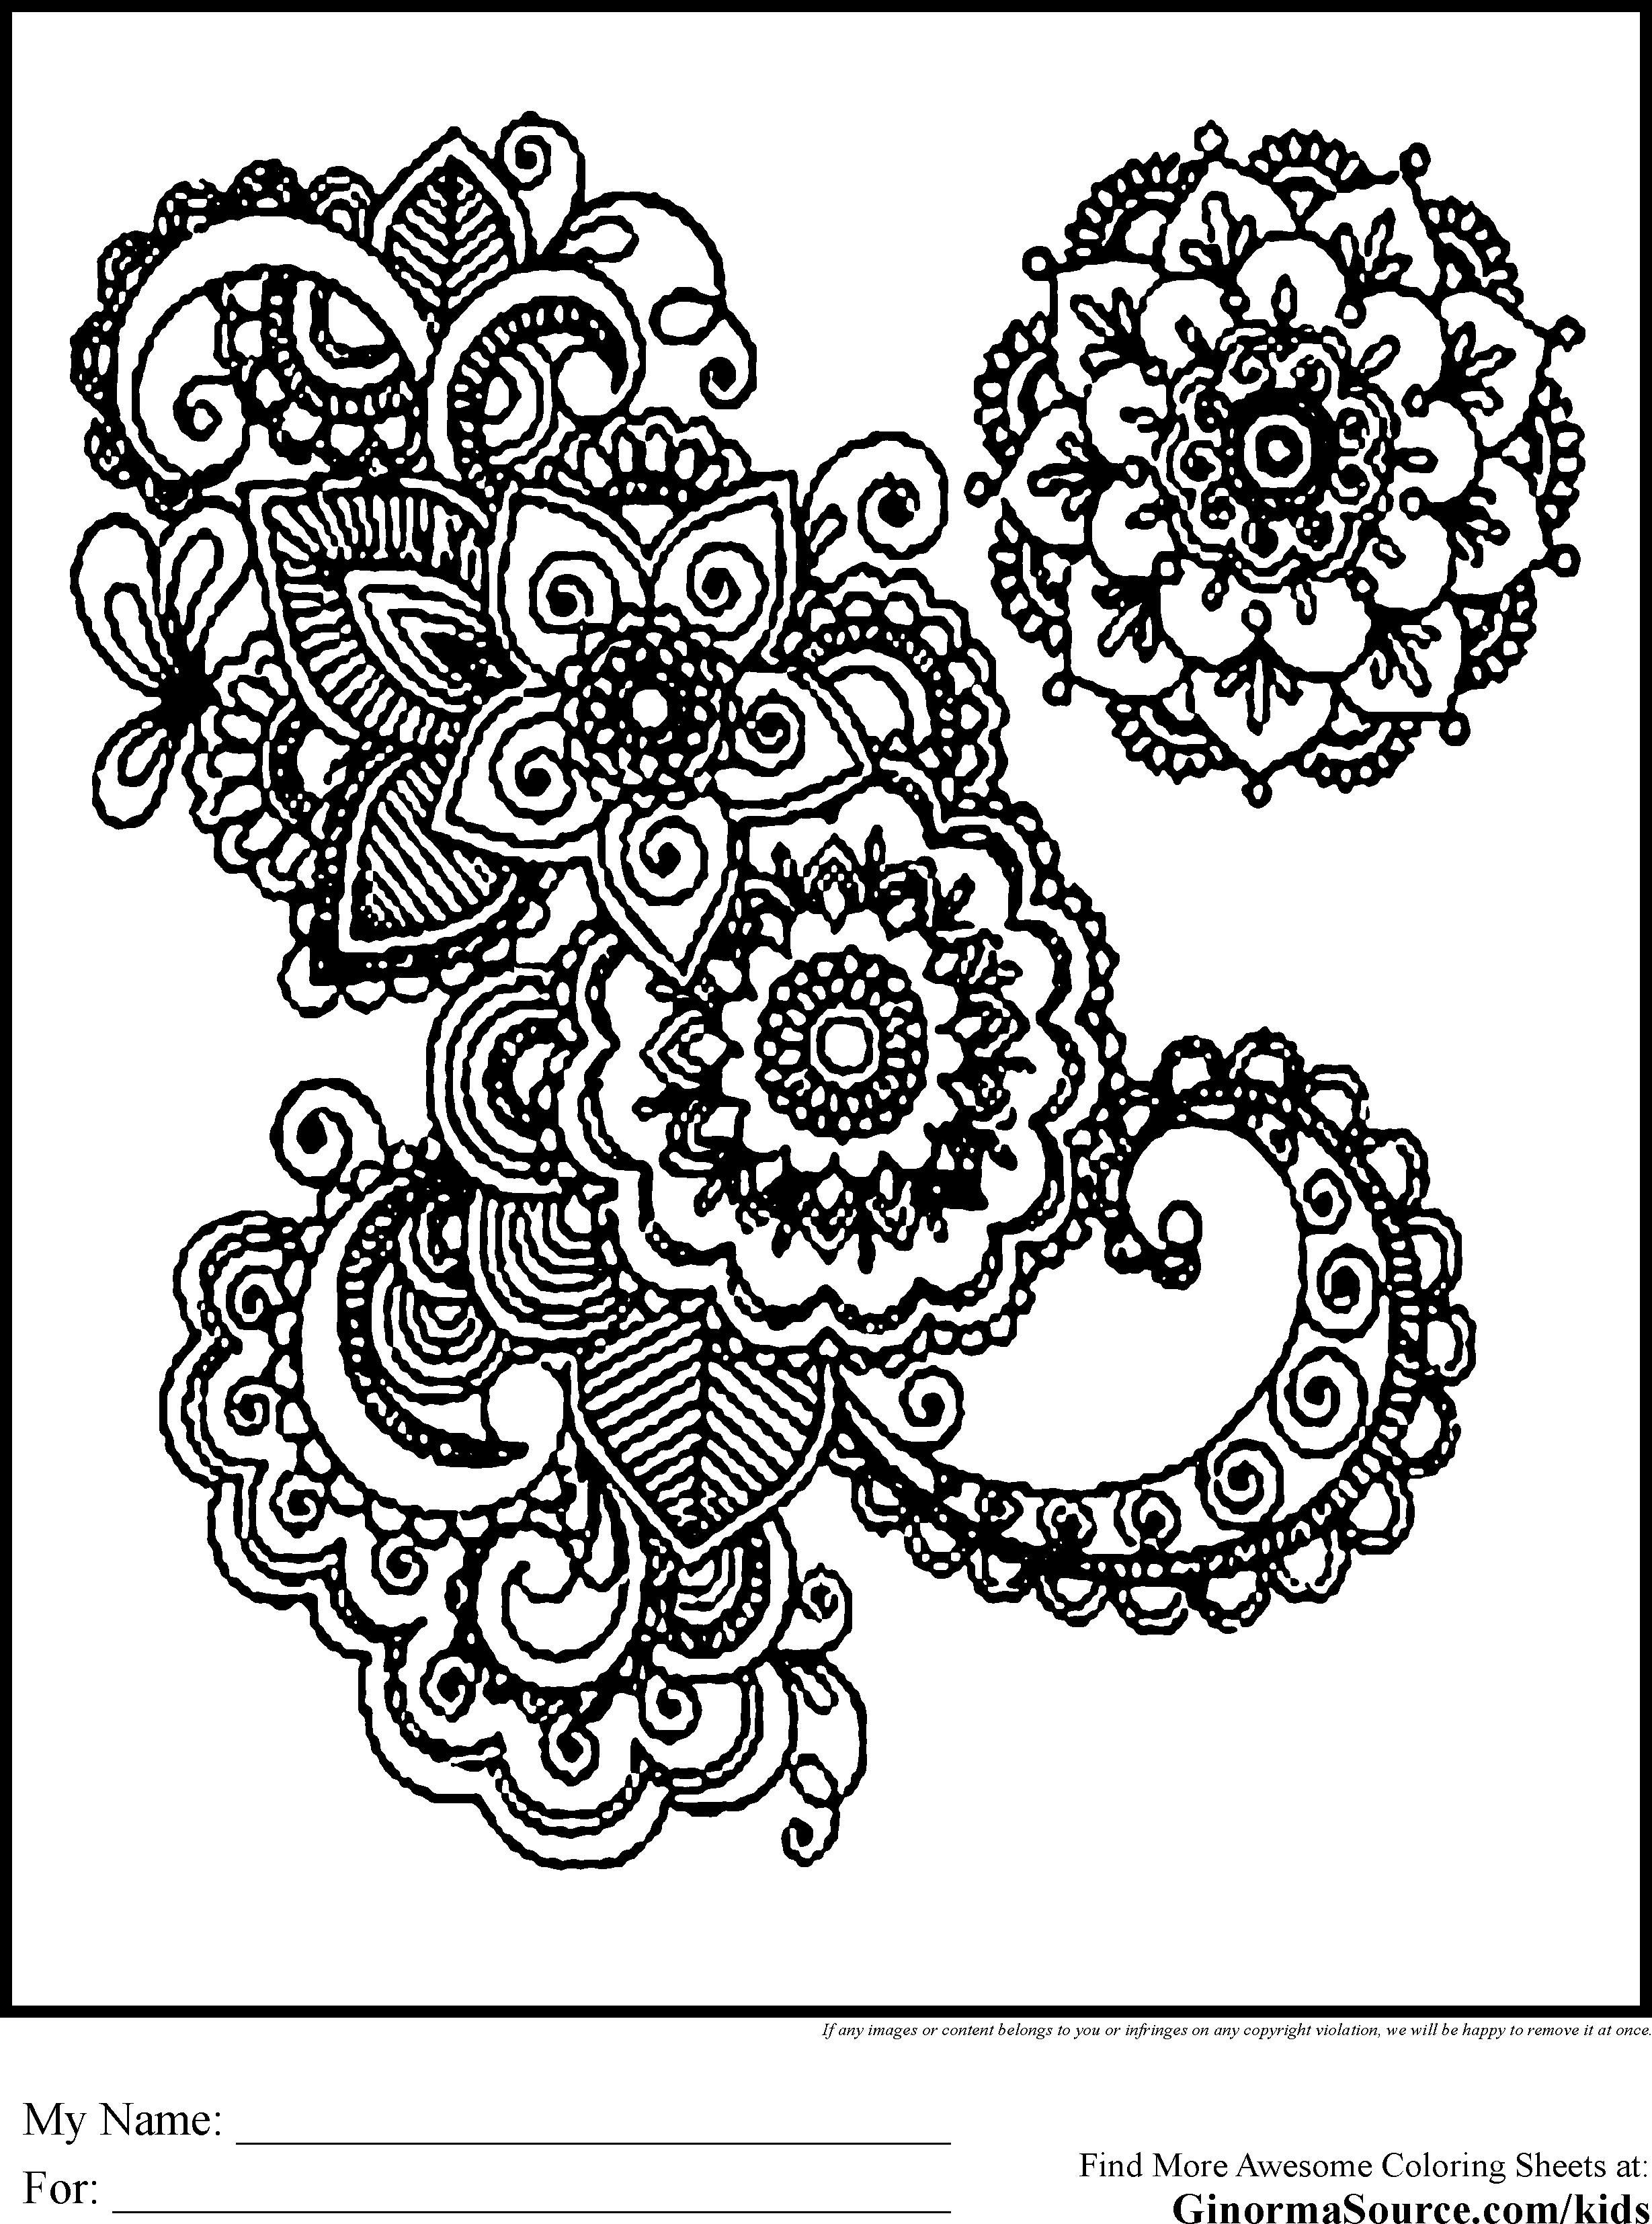 Coloring Pages To Color Online For Free For Adults